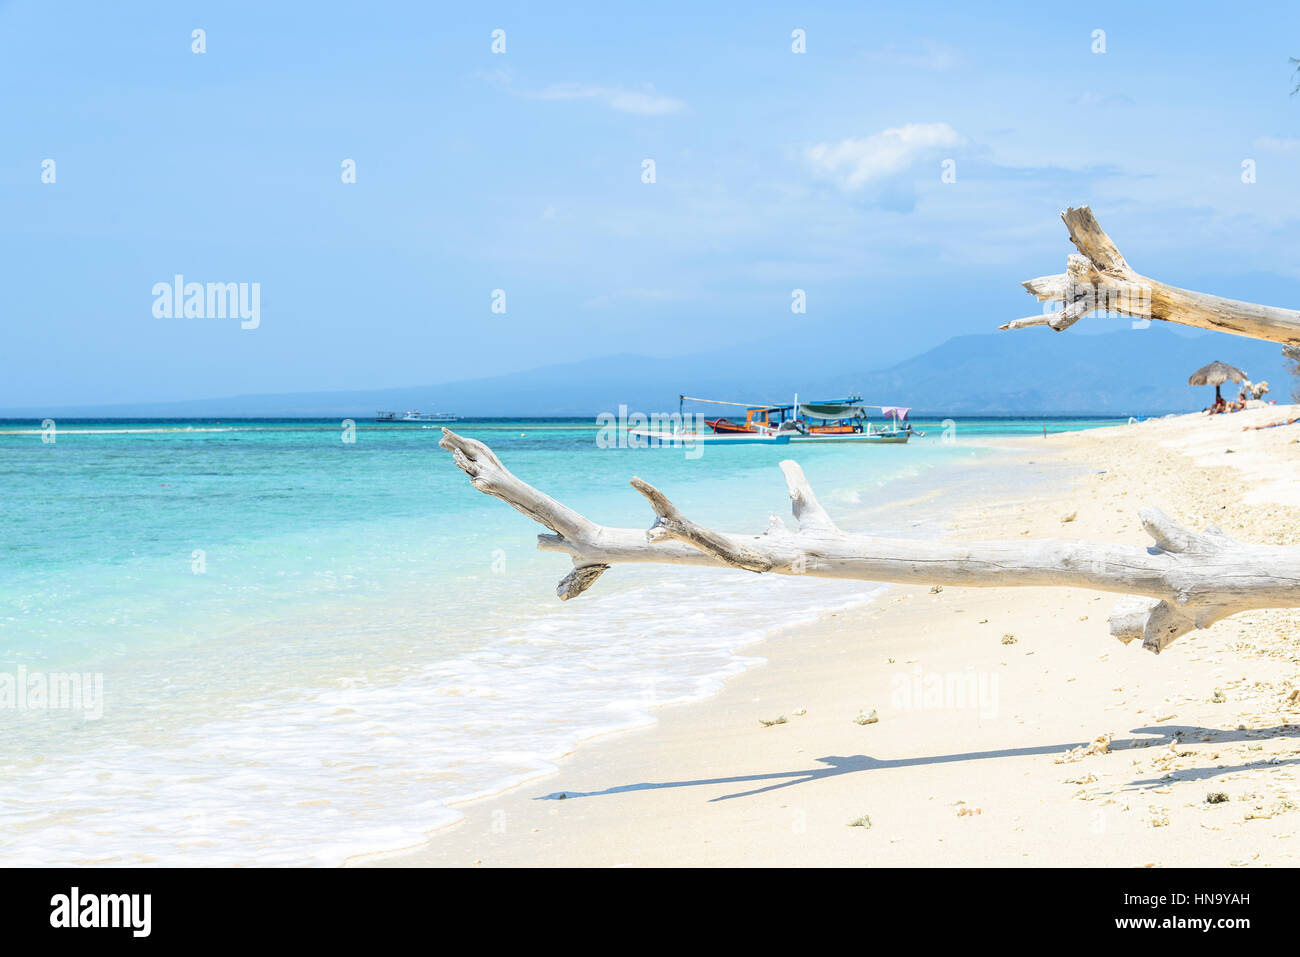 Beach of Gili Meno with crystal clear turquoise water, Lombok, Indonesia Stock Photo